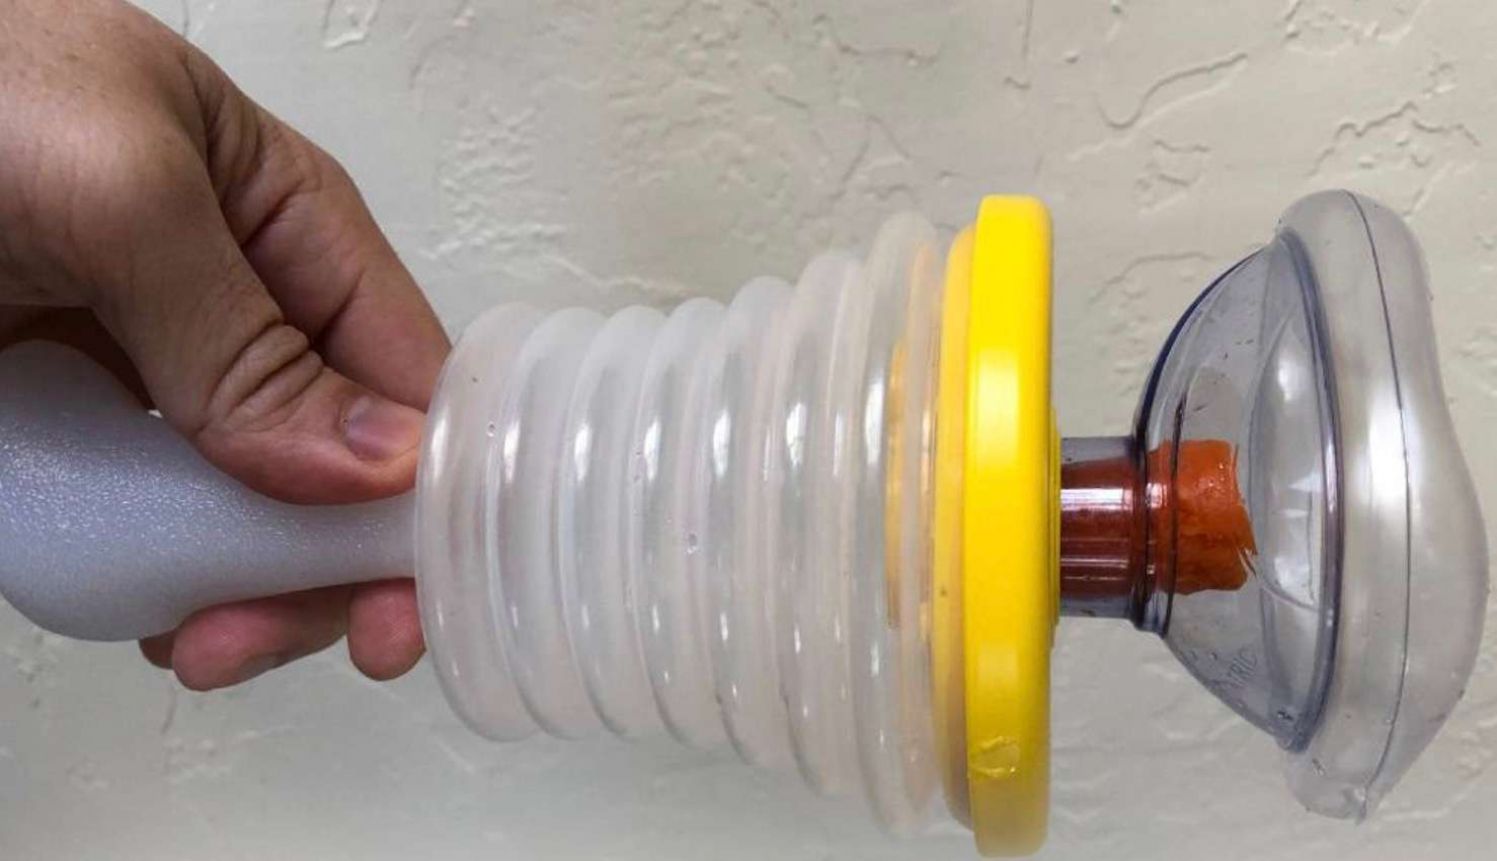 Long Island inventor's 'LifeVac' anti-choking device purchased by fire  department - Newsday